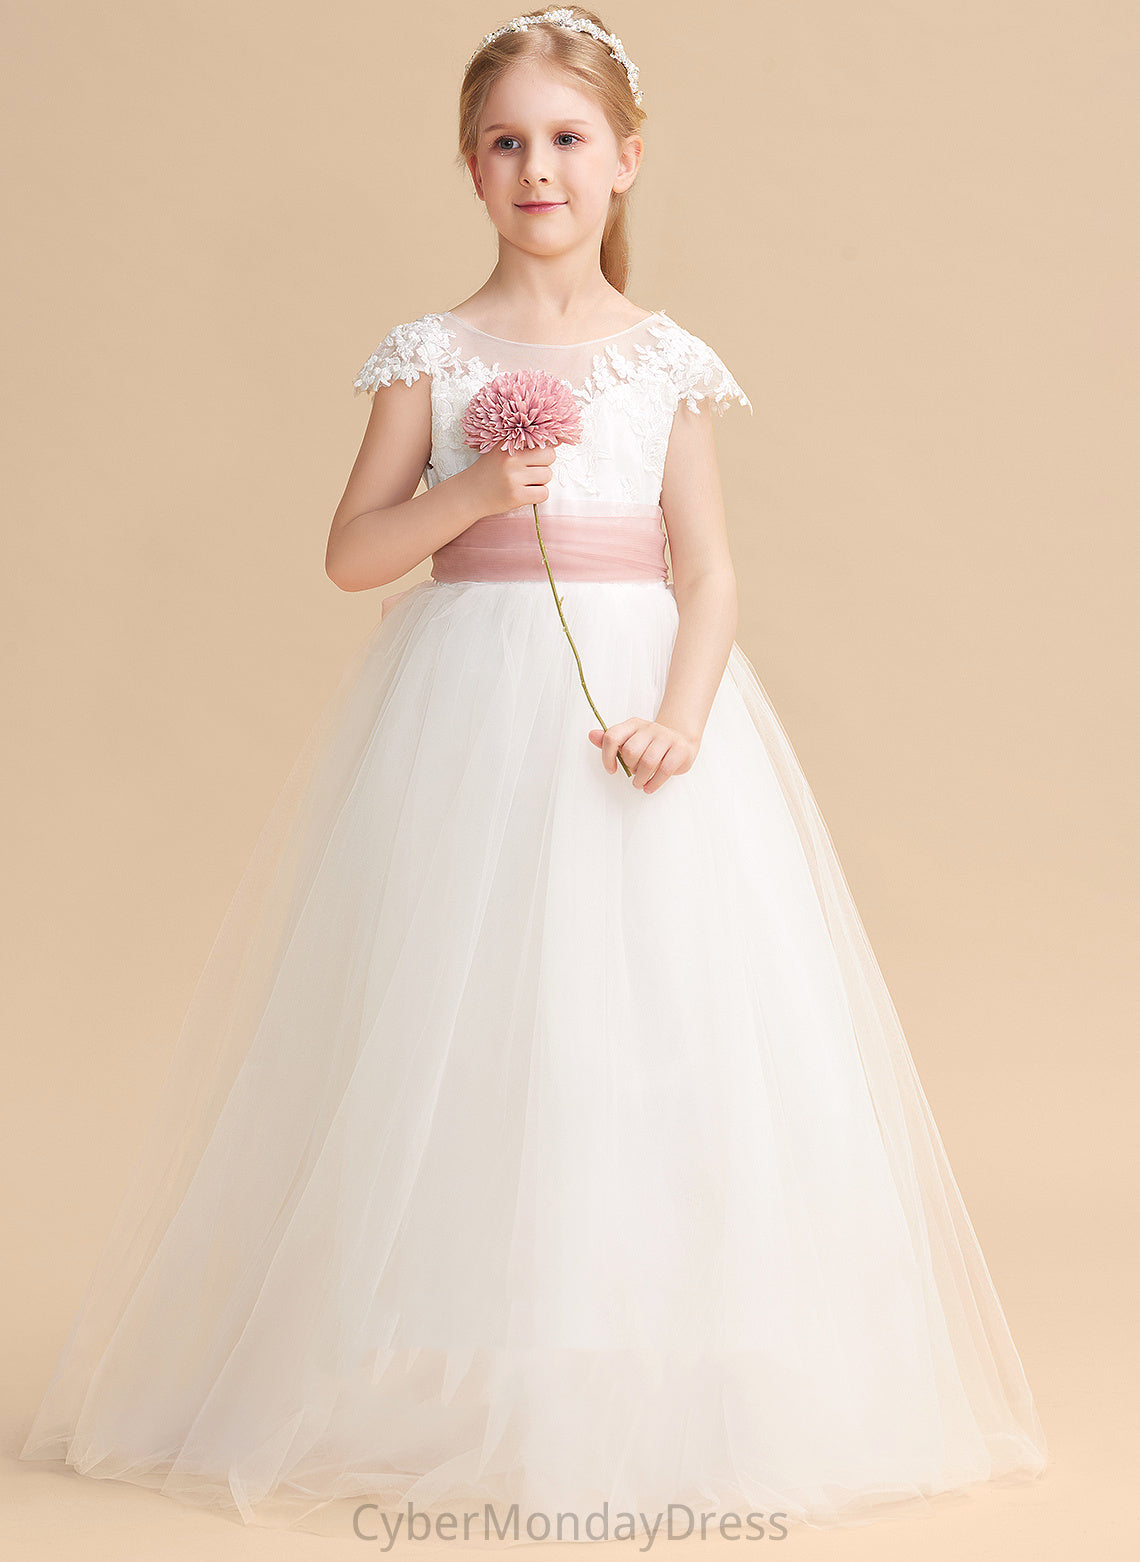 Girl Sleeveless Lace/Sash Scoop Flower Teagan Lace - Dress With Ball-Gown/Princess Flower Girl Dresses Floor-length Neck